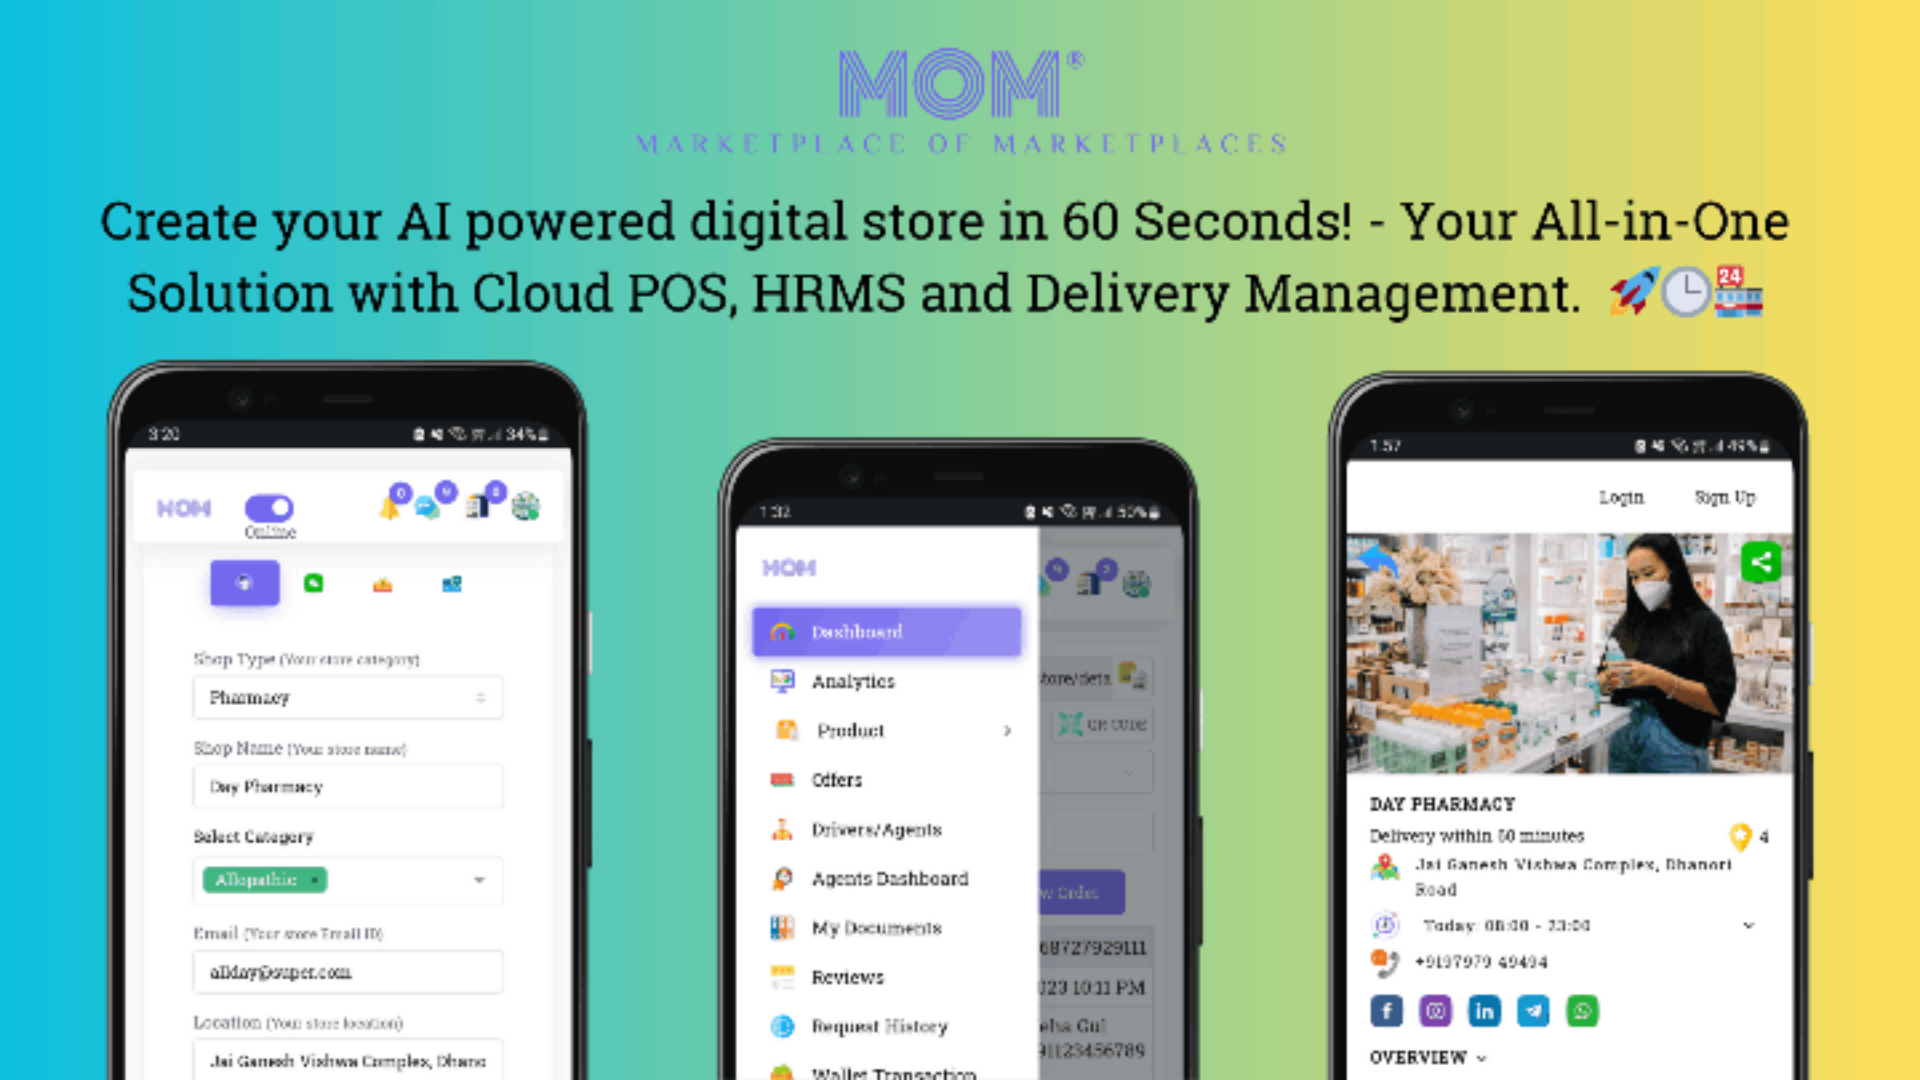 Lifetime Deal to MOM Shop App-AI powered store creator: PRO PLUS for $99